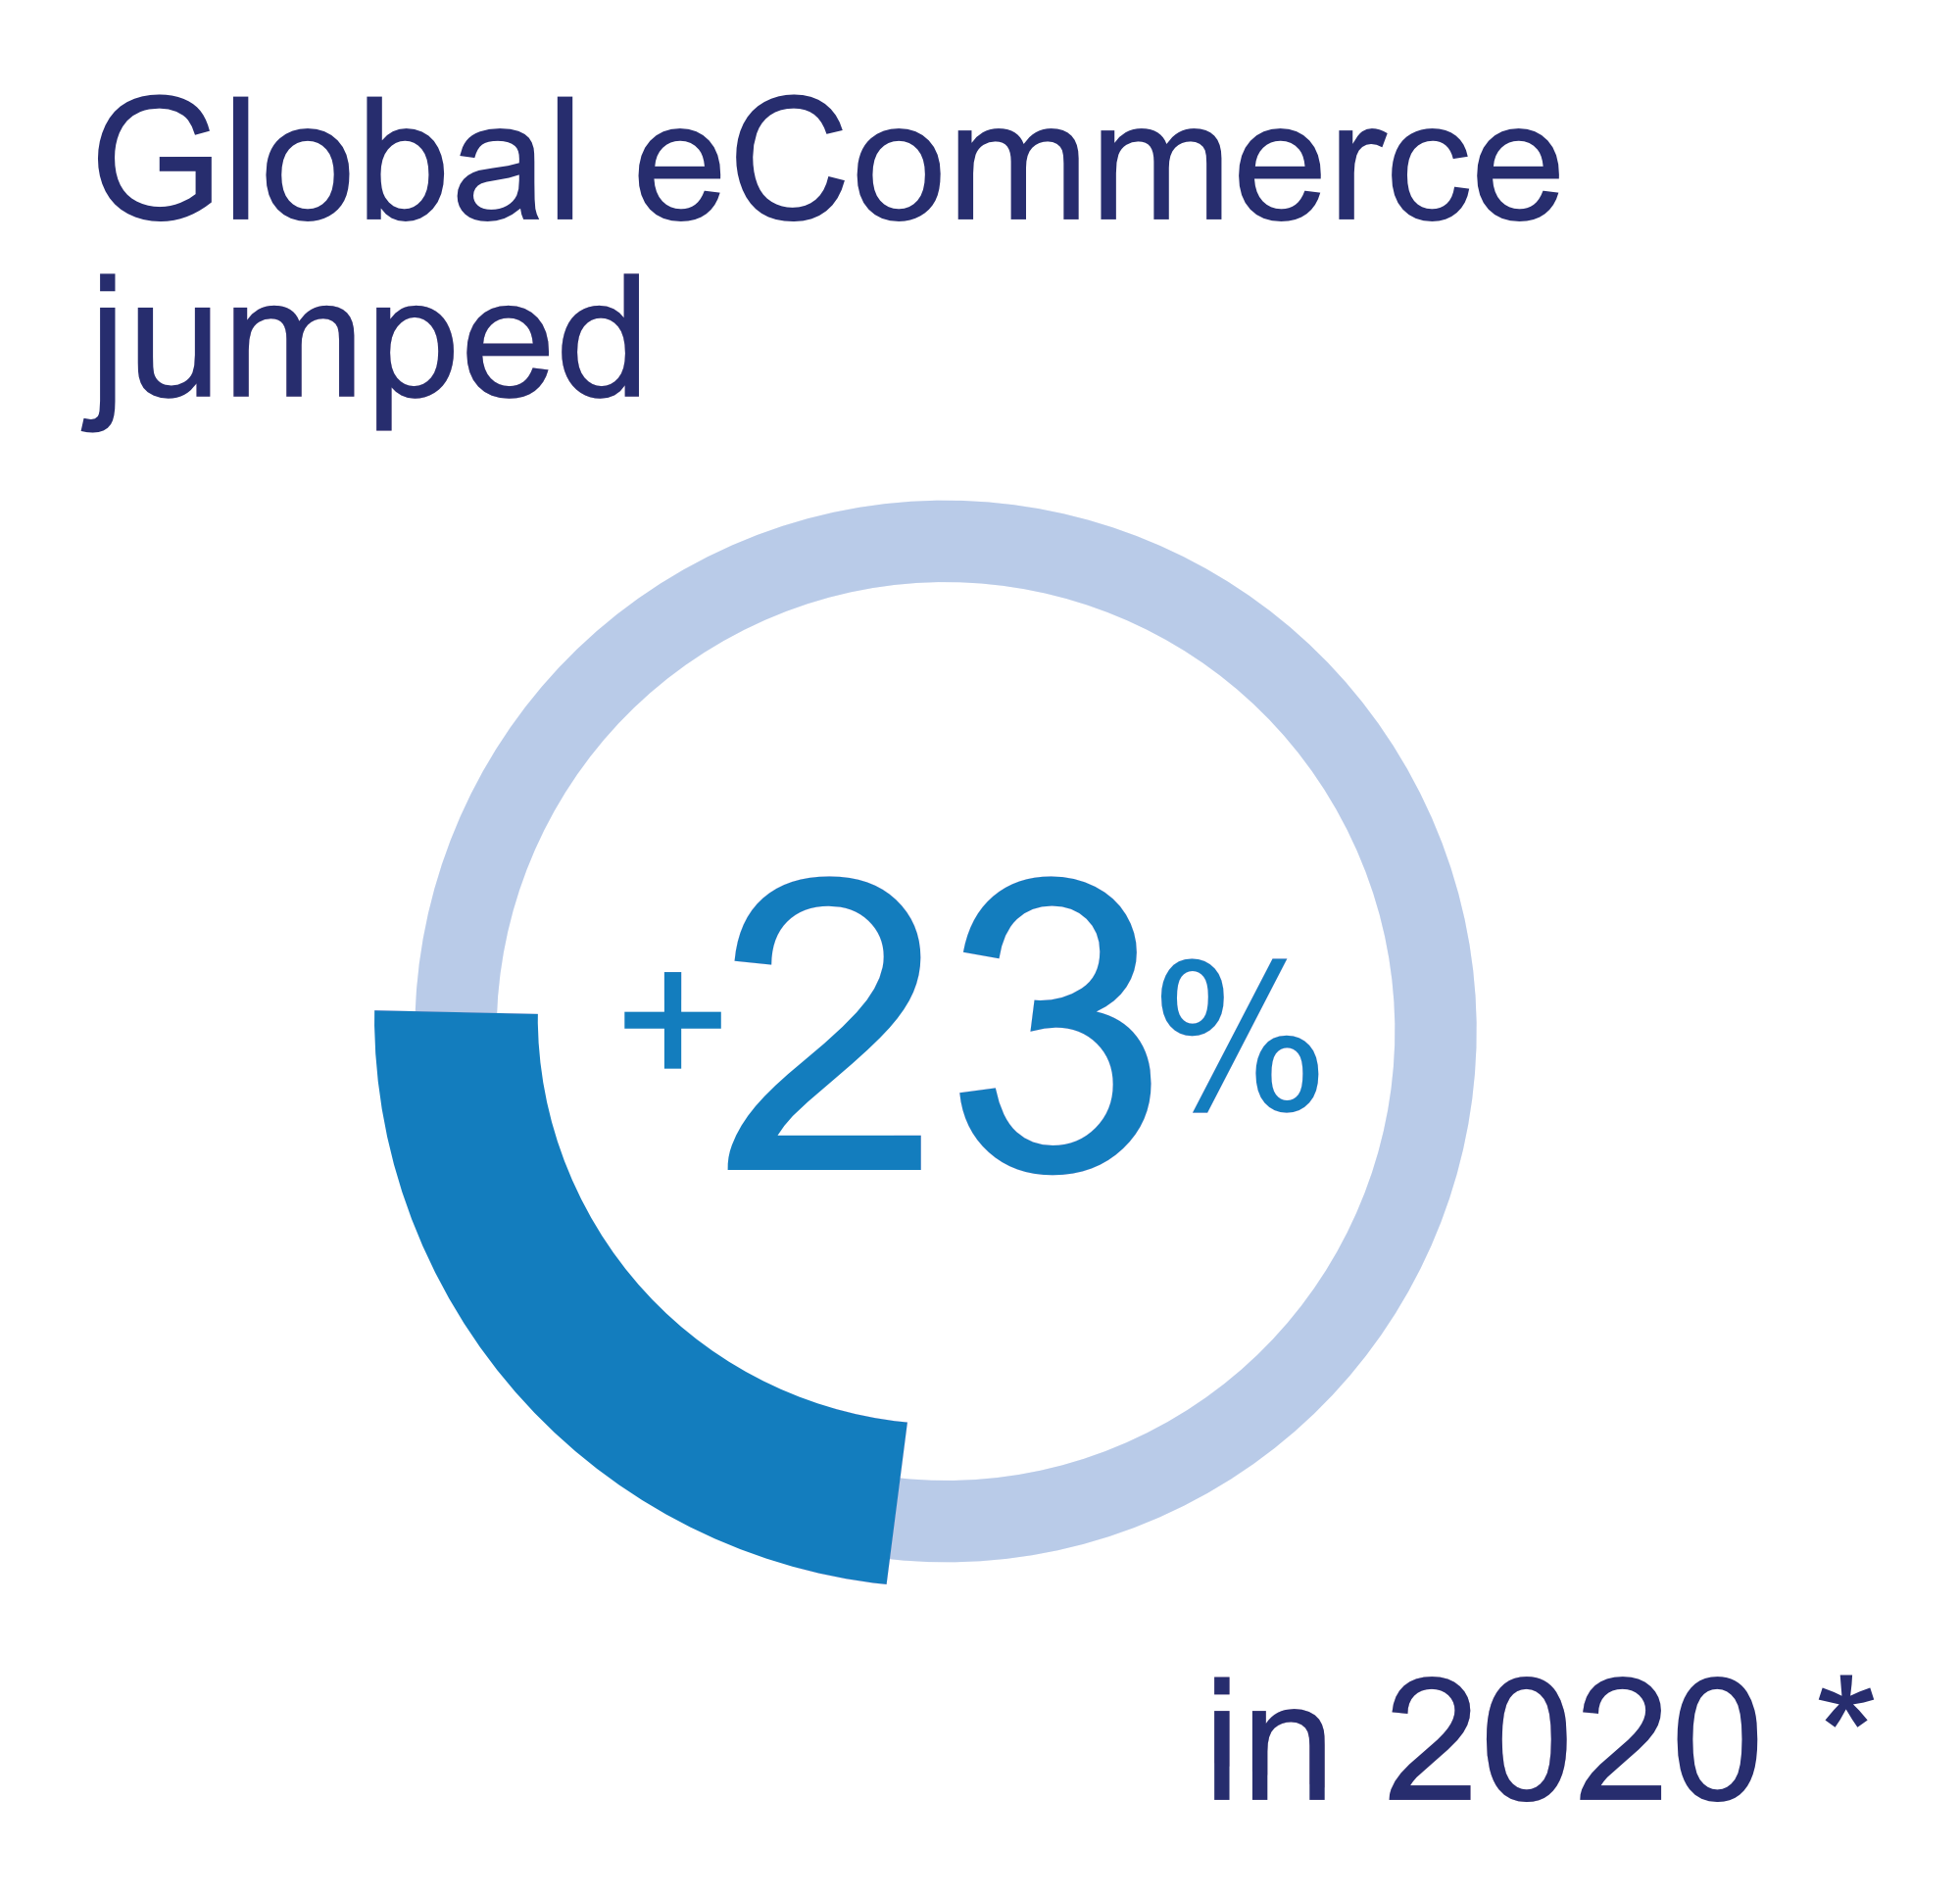 Global eCommerece jumped +23% in 2020